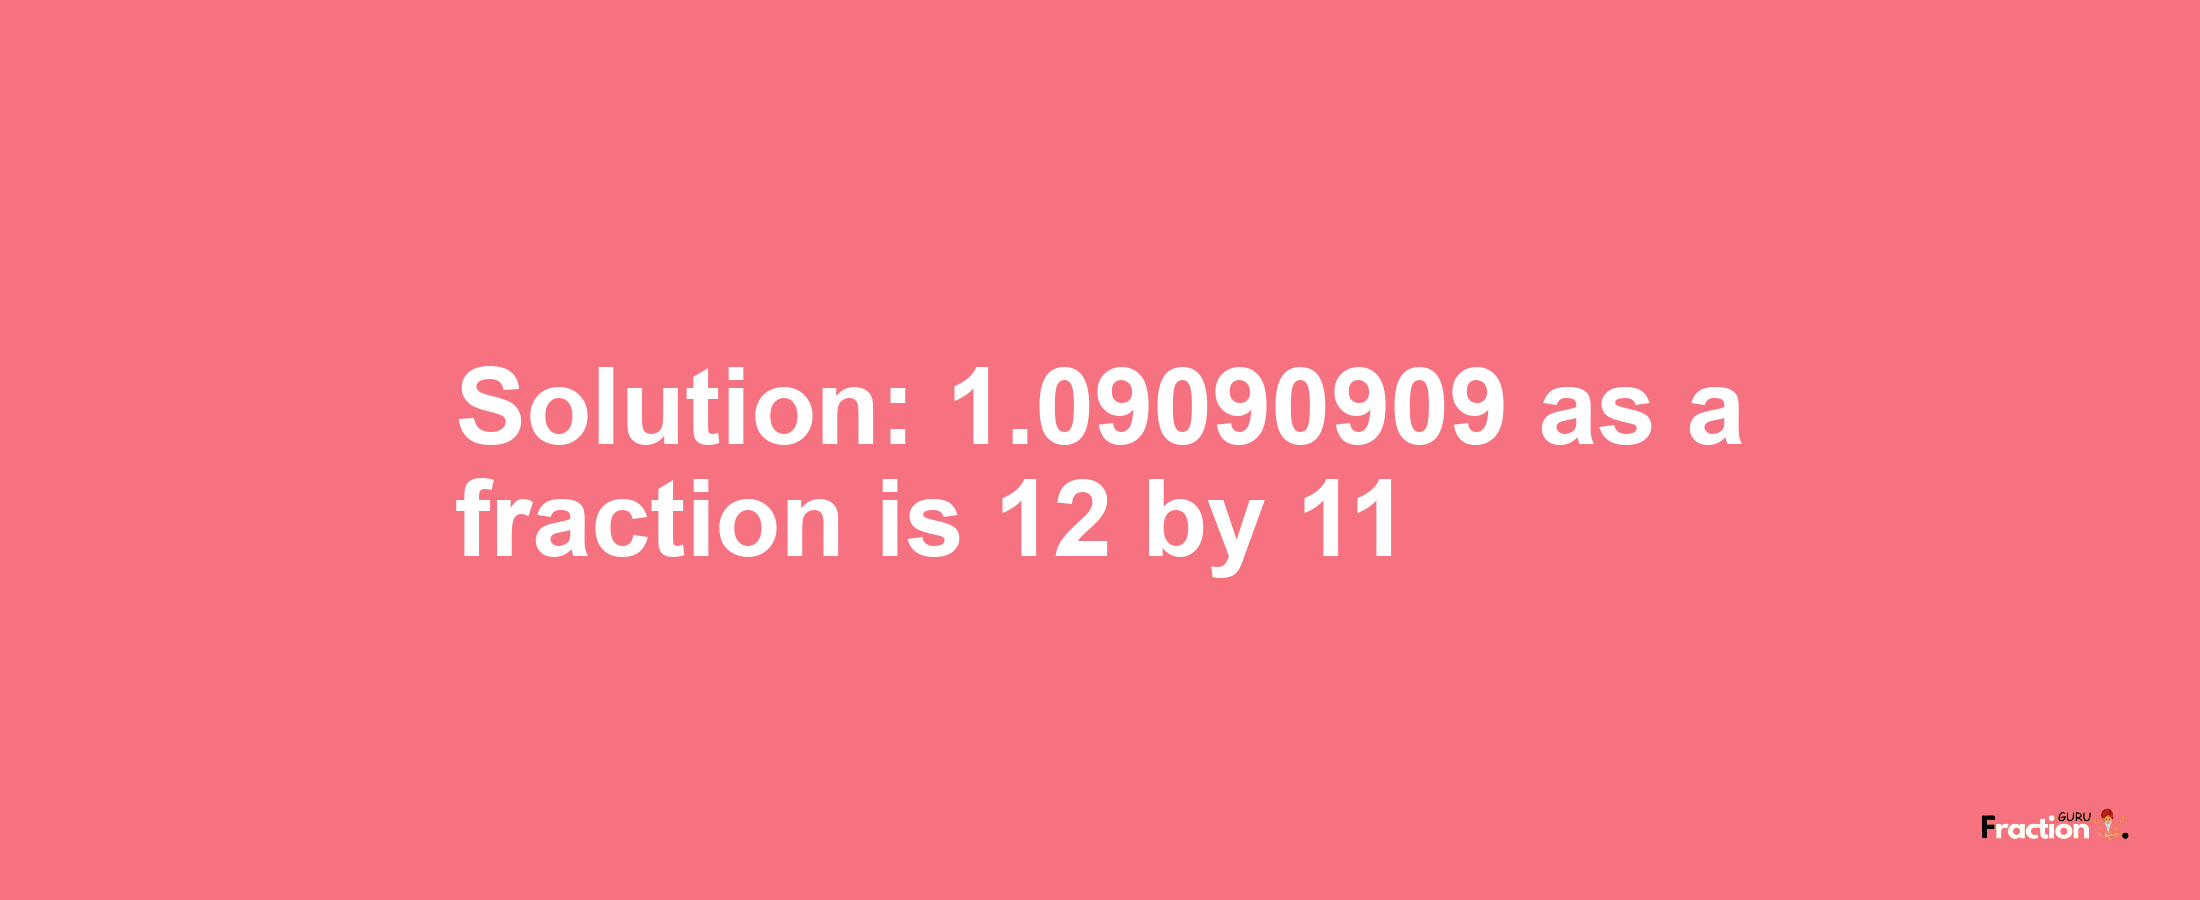 Solution:1.09090909 as a fraction is 12/11